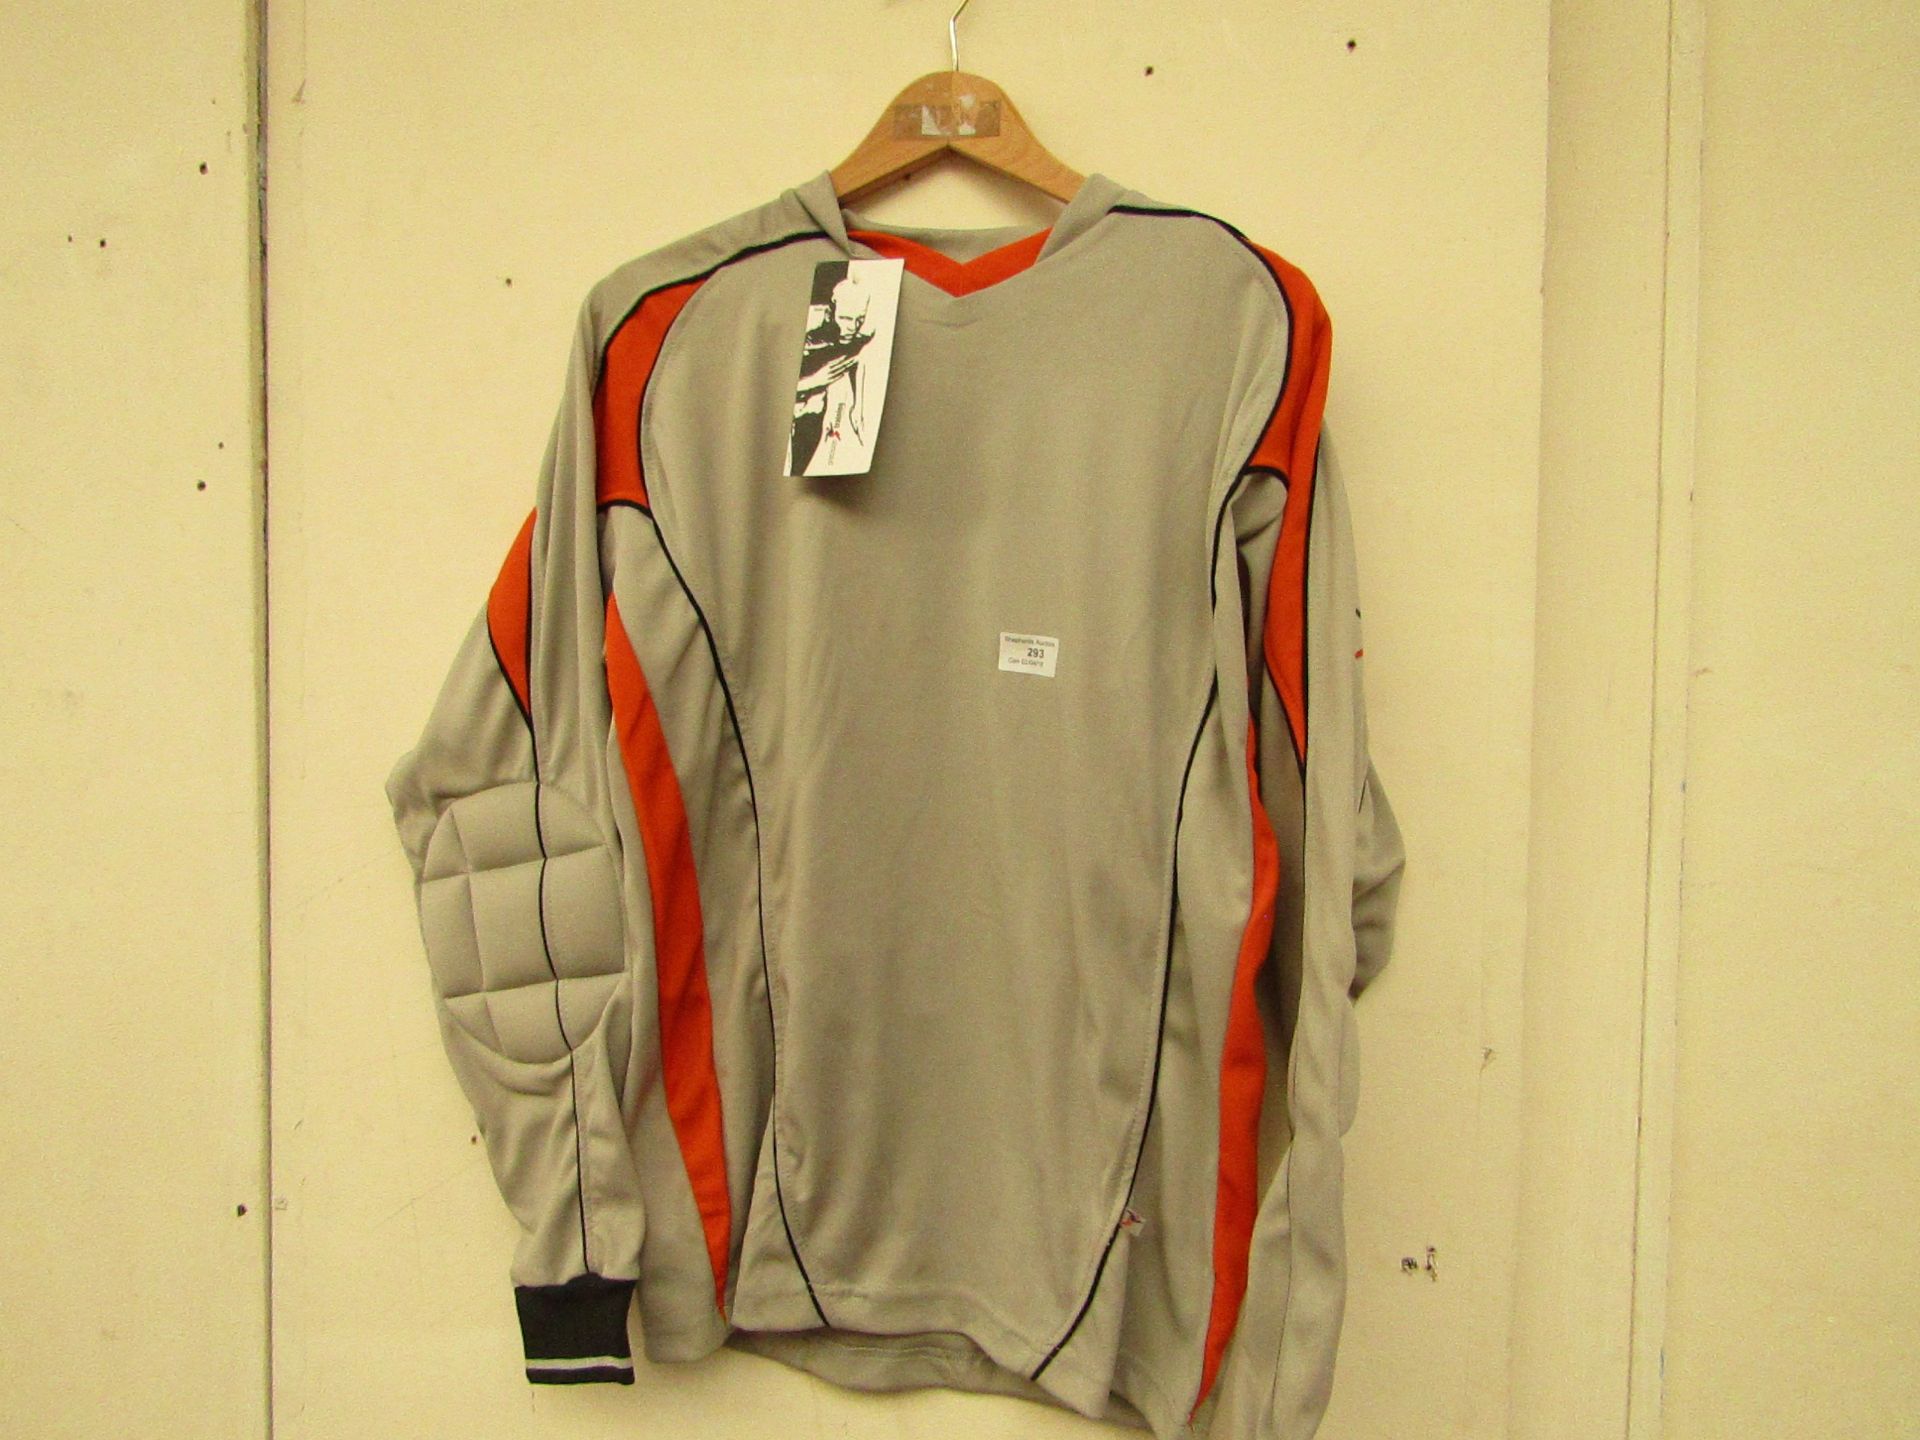 Serie A Goalkeeper jersey size 34/36, new with tags.